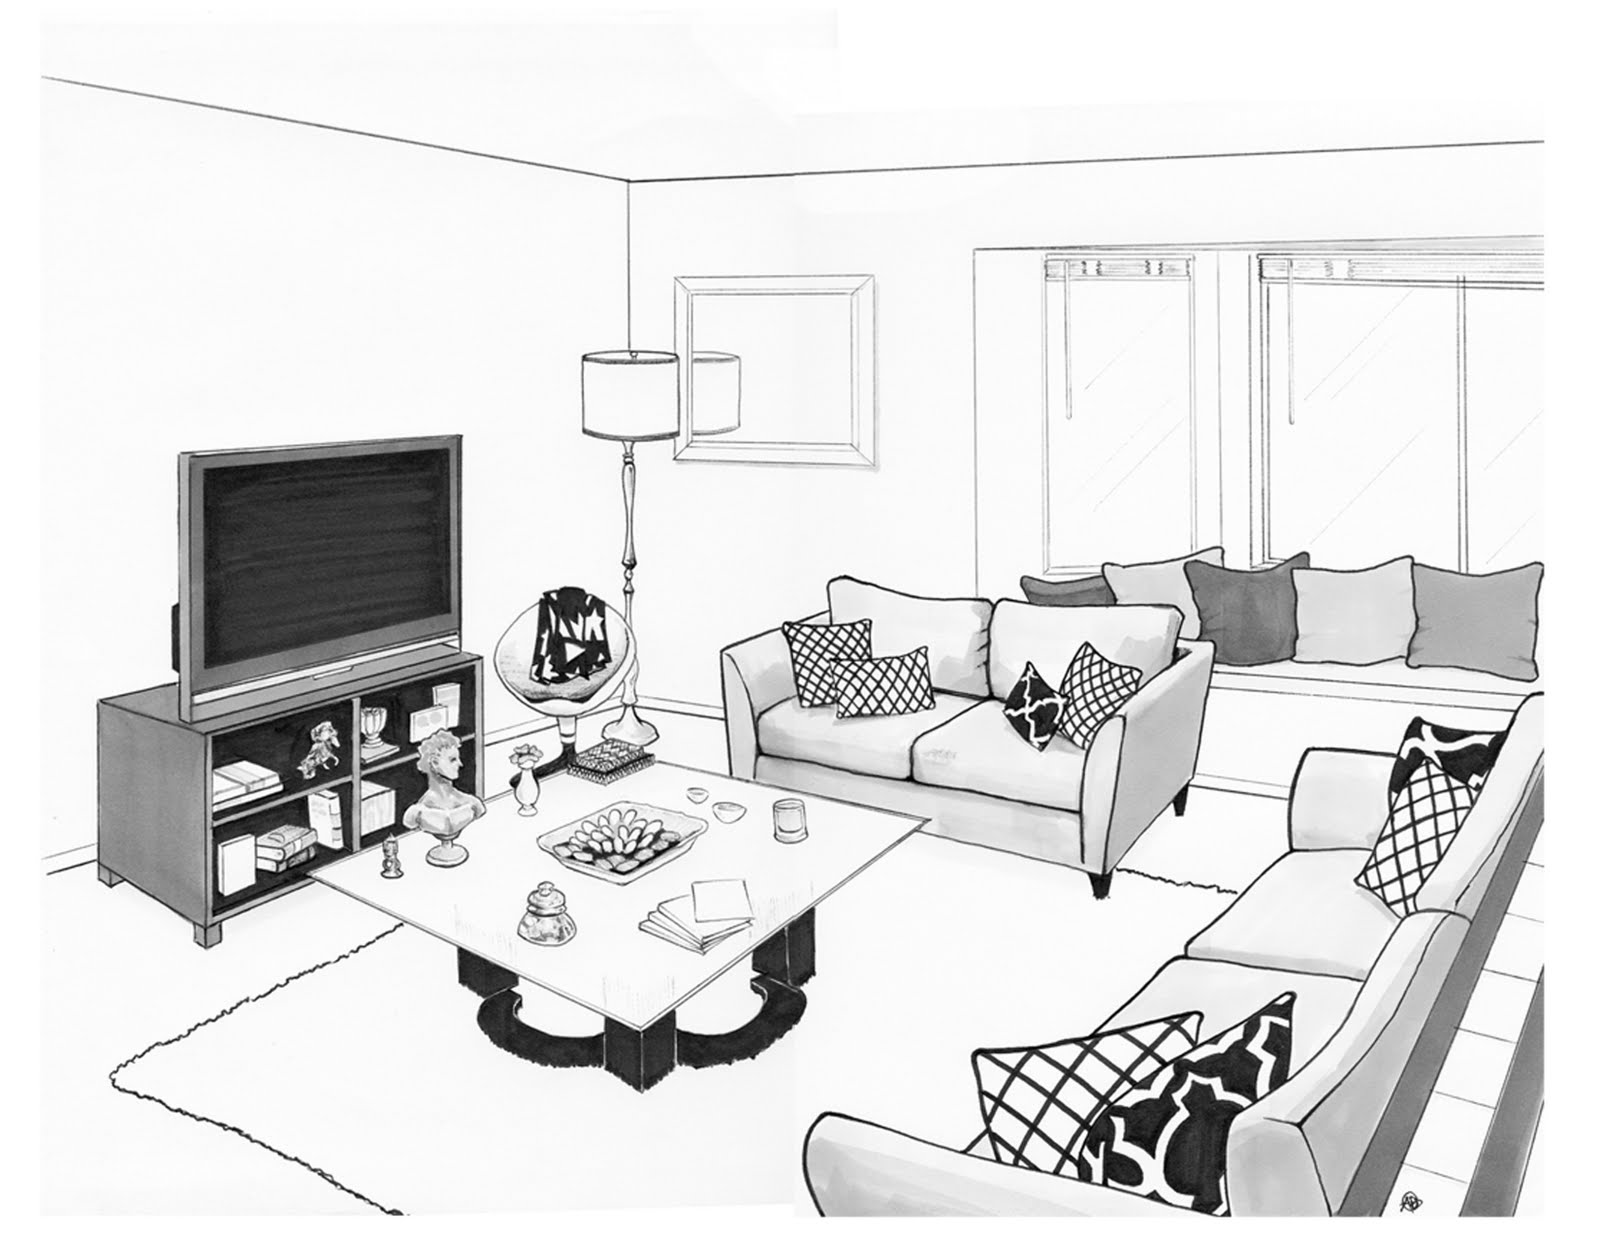 render drawing of andres living room